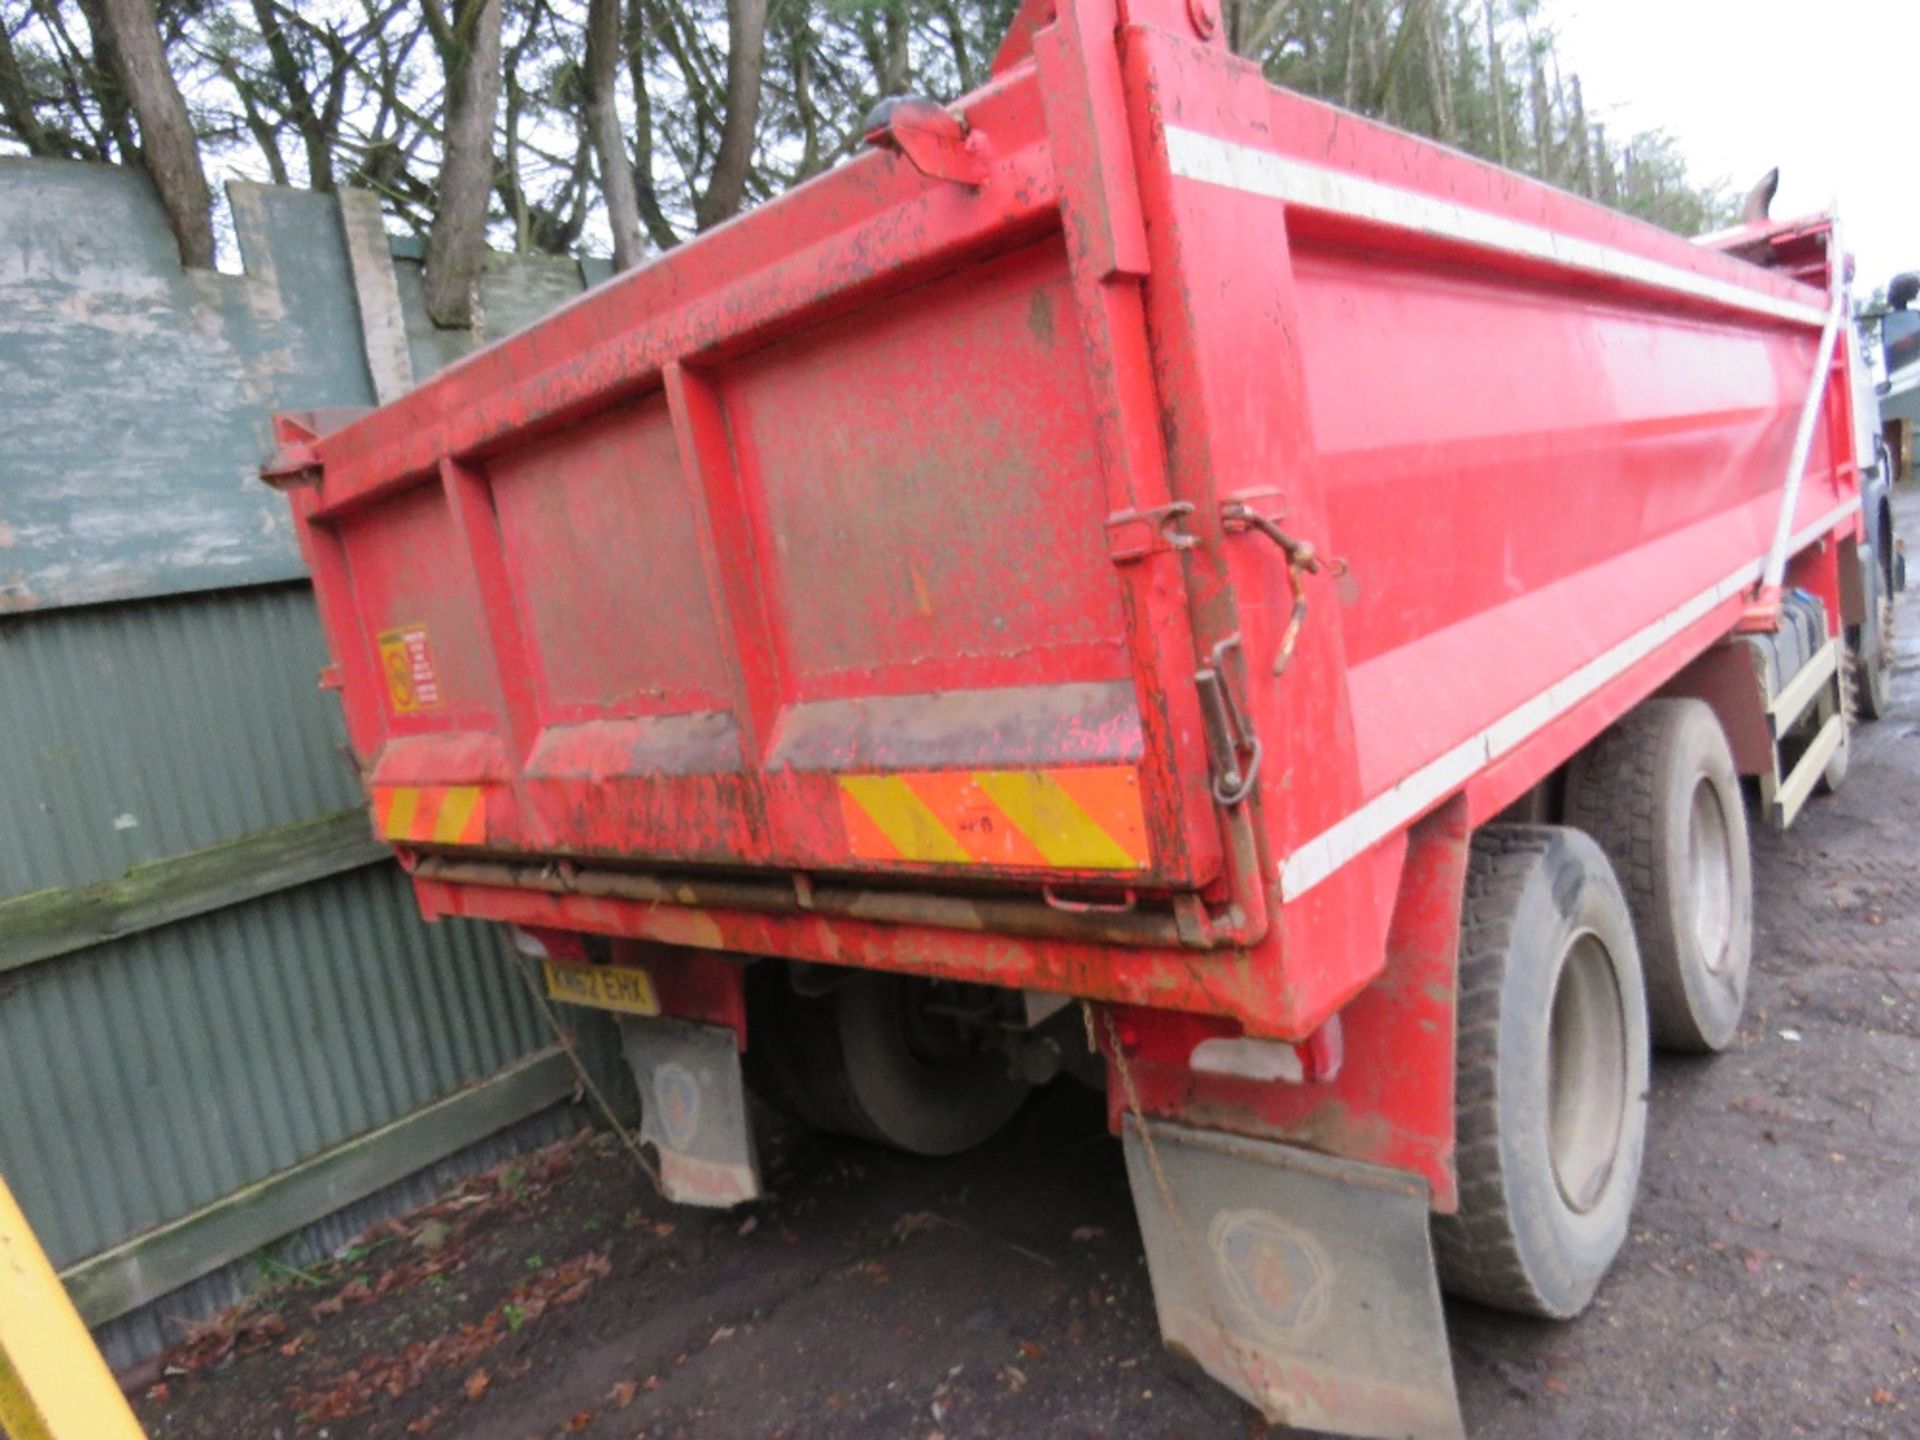 SCANIA P400 8X4 TIPPER LORRY REG:KM62 EHX. SEMI AUTO GEARBOX. 2013 REGISTERED. TESTED TILL MARCH 202 - Image 4 of 12